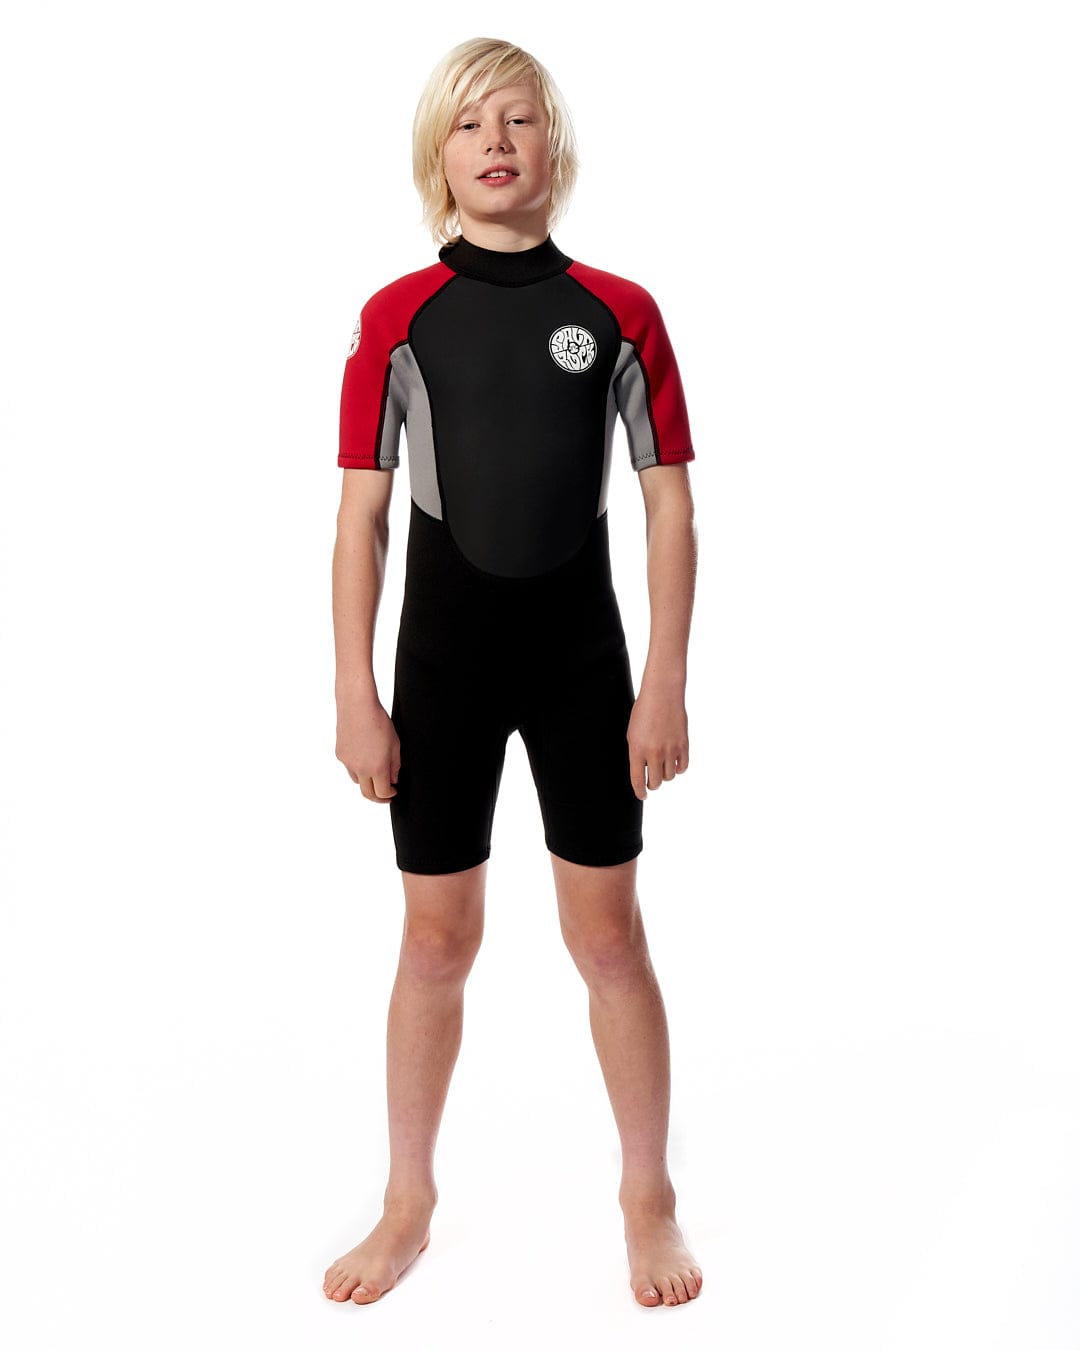 A young boy in a Saltrock Core - Boys 3/2 Shortie Wetsuit in Black/Red standing against a white background.